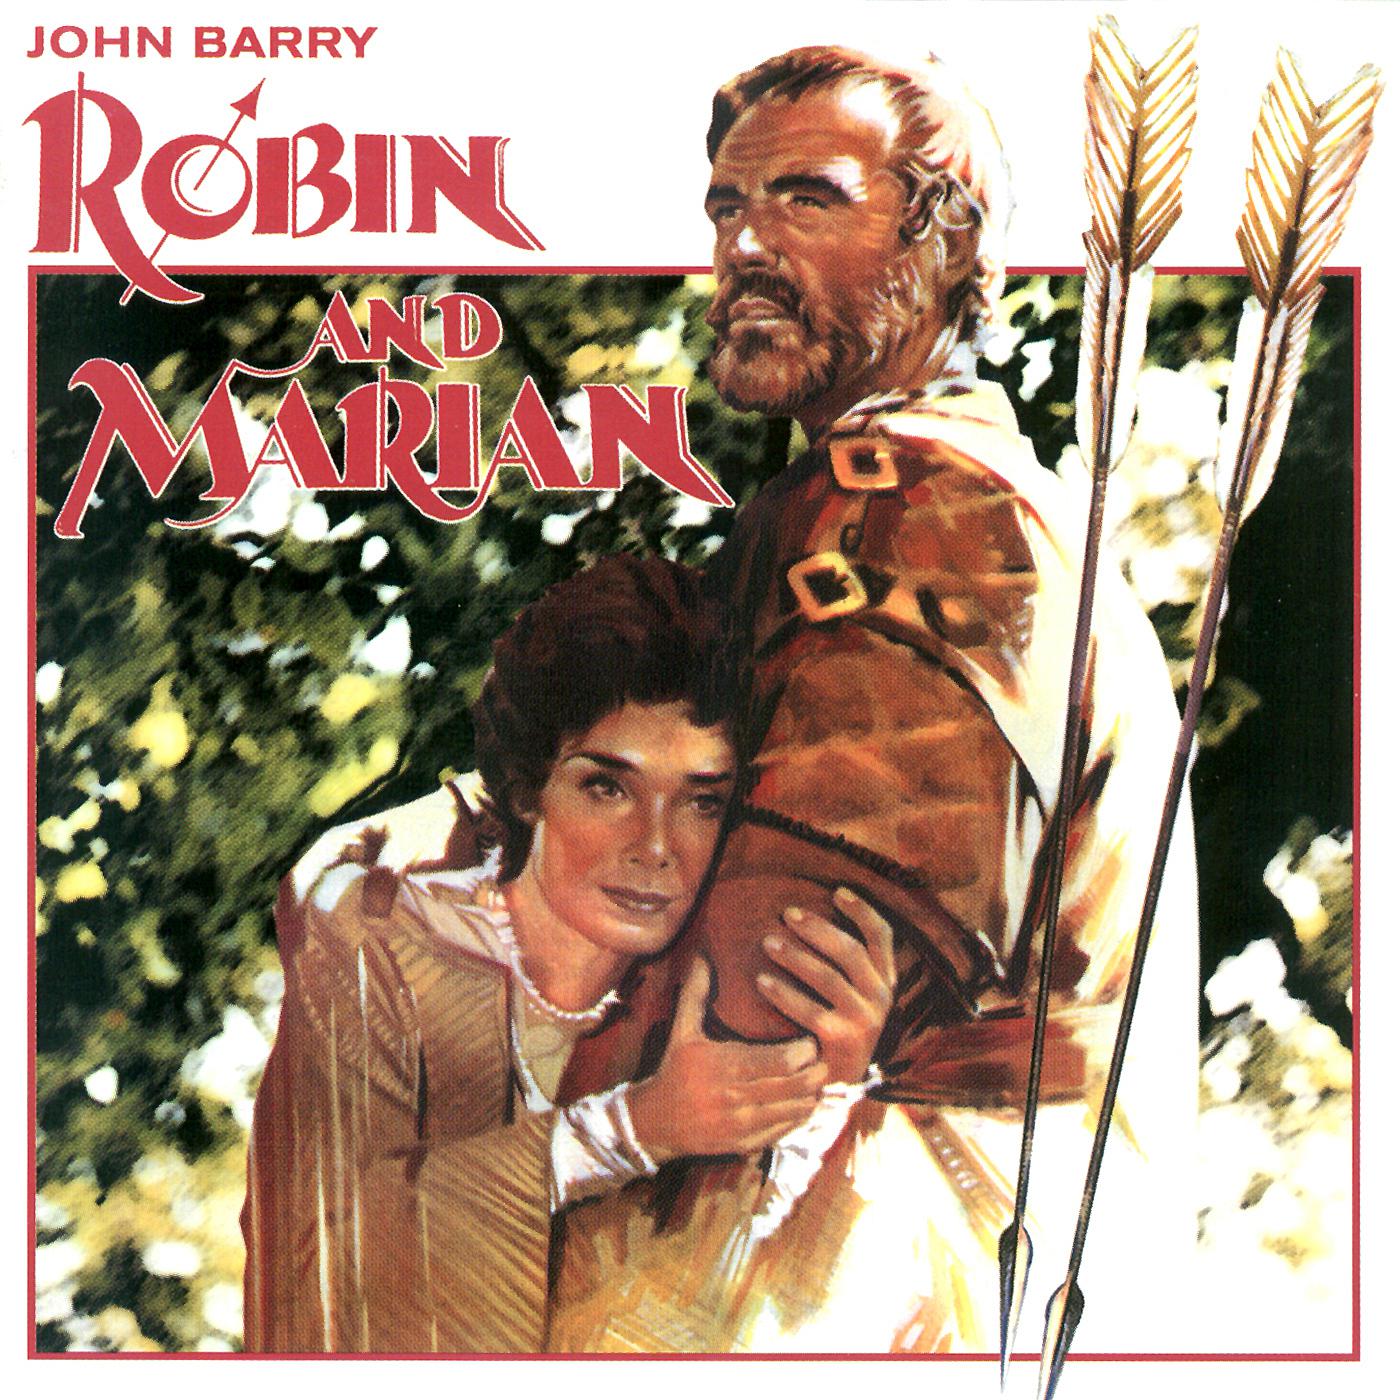 The Fight Must Go On (From "Robin and Marian")